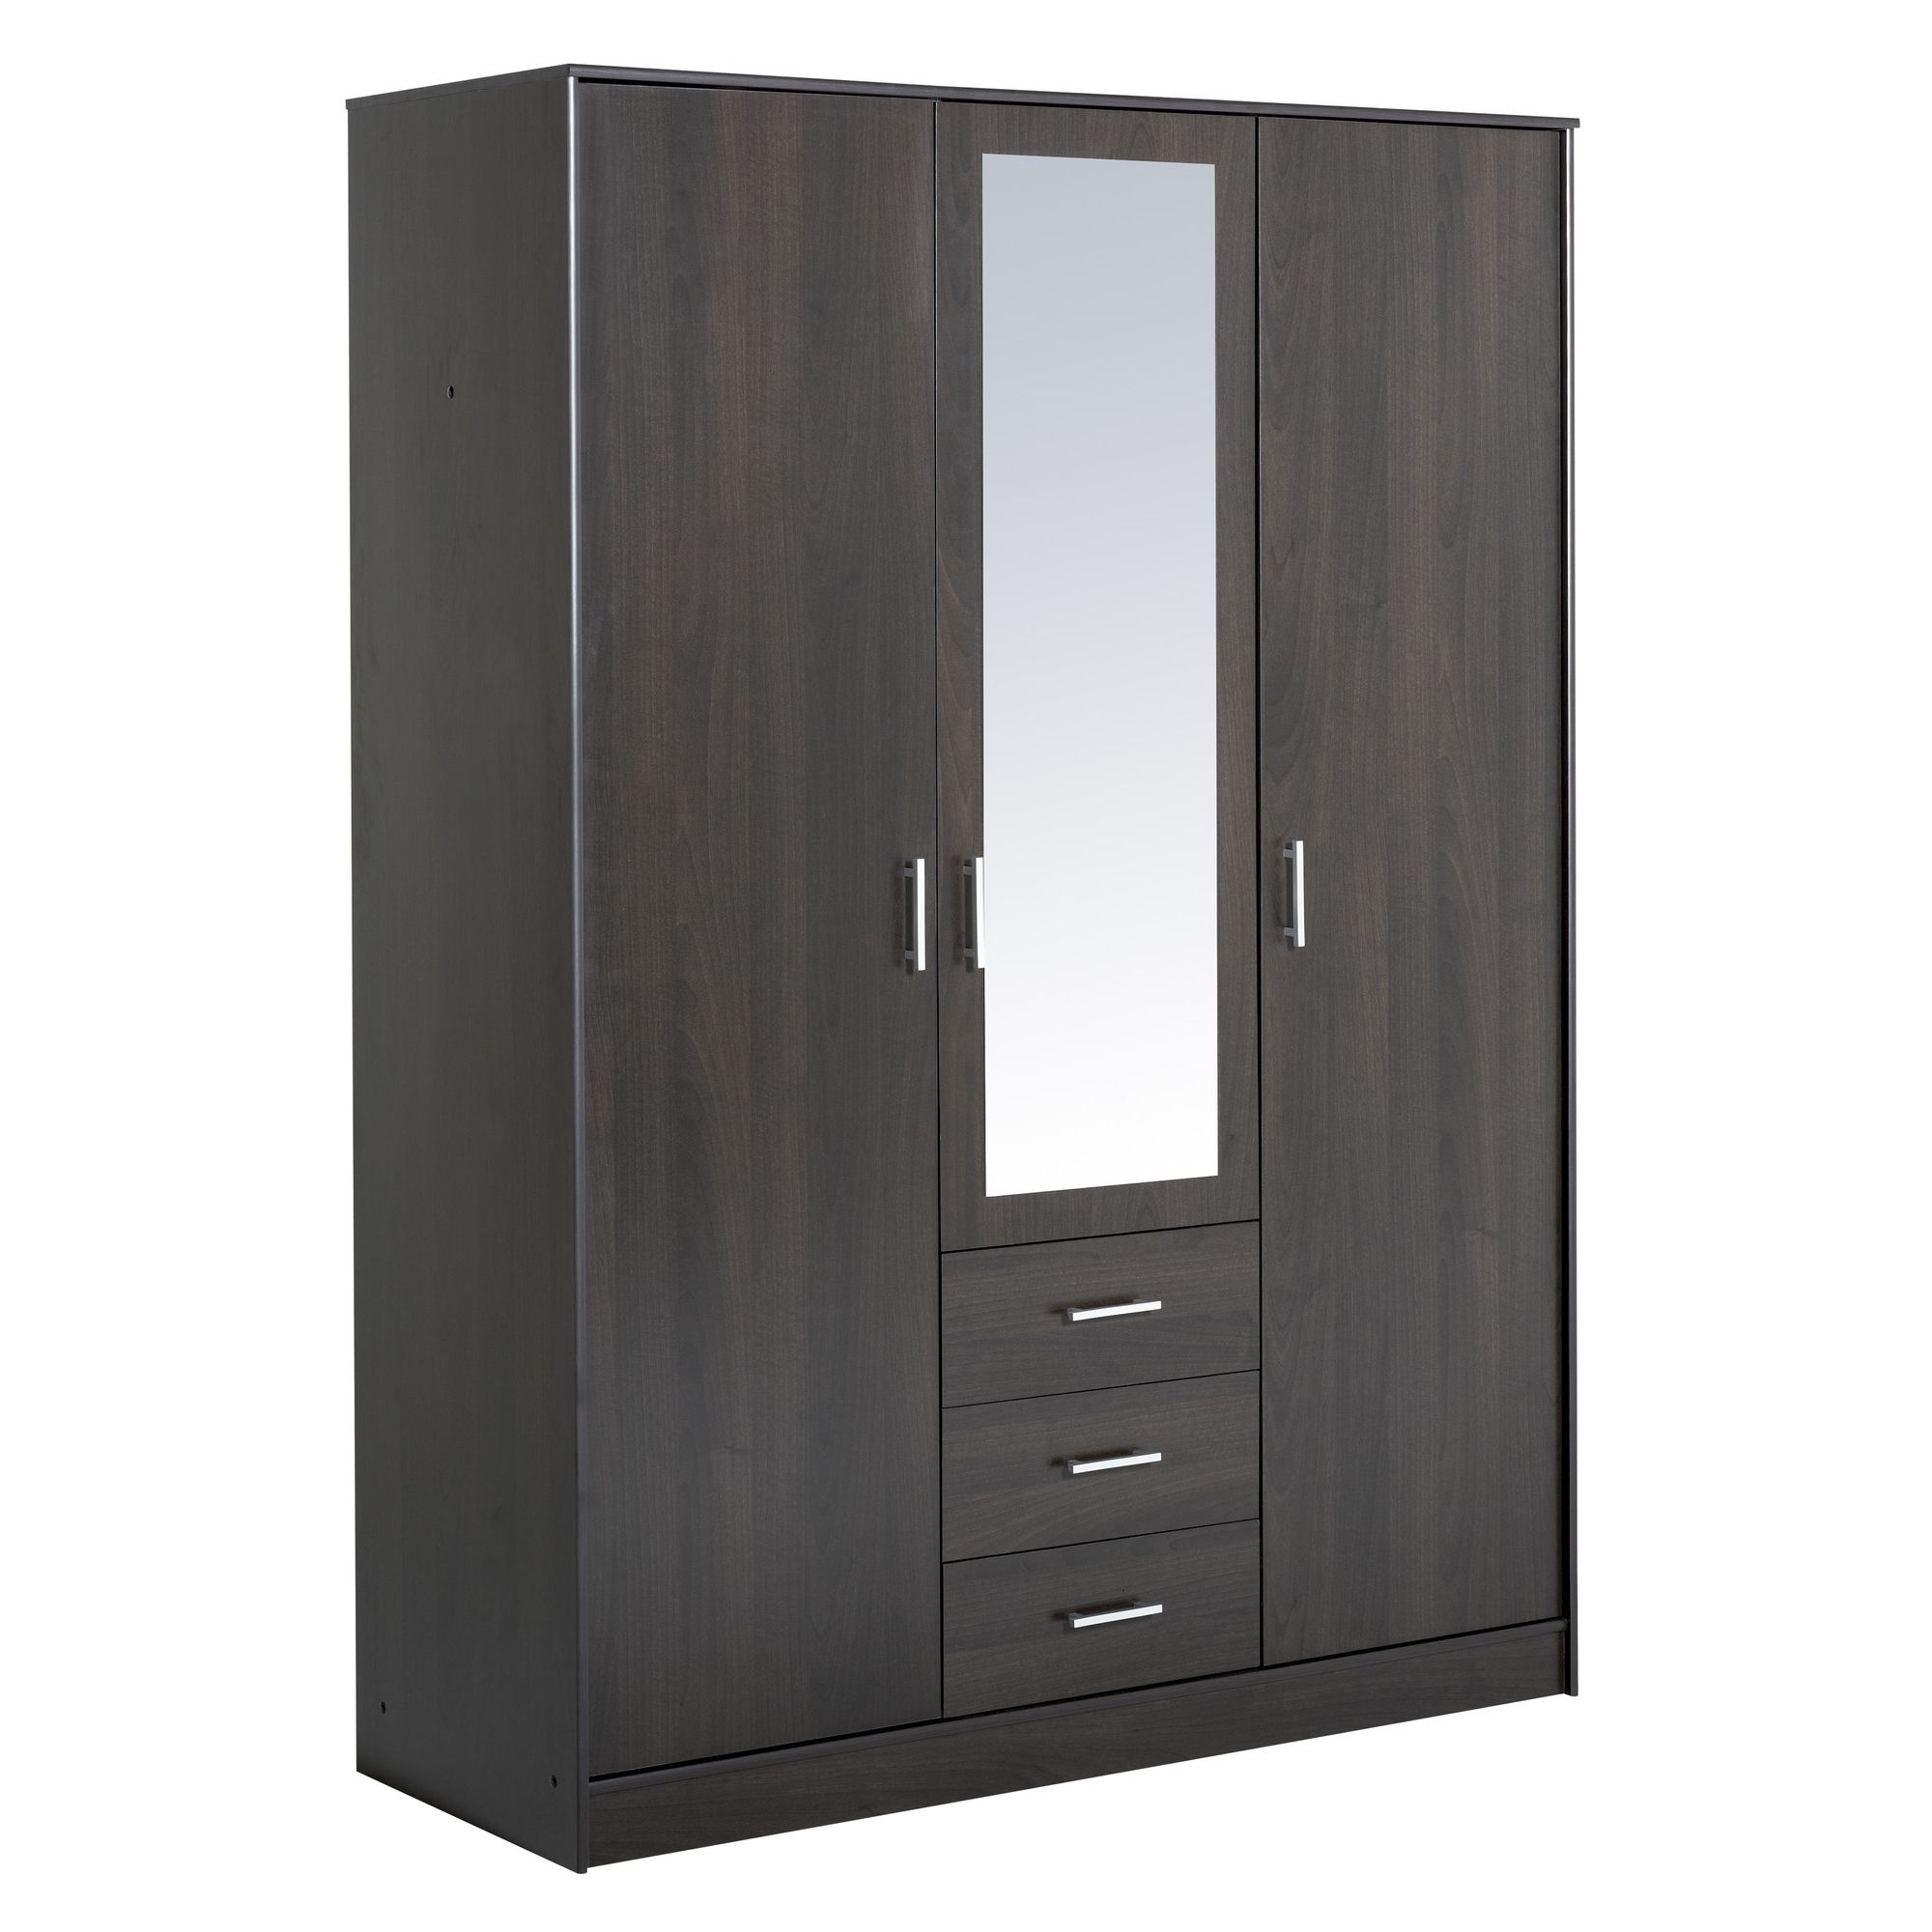 Parisot Essential Wardrobe with 3 Doors and 3 Drawers - Coffee Effect at Tescos Direct